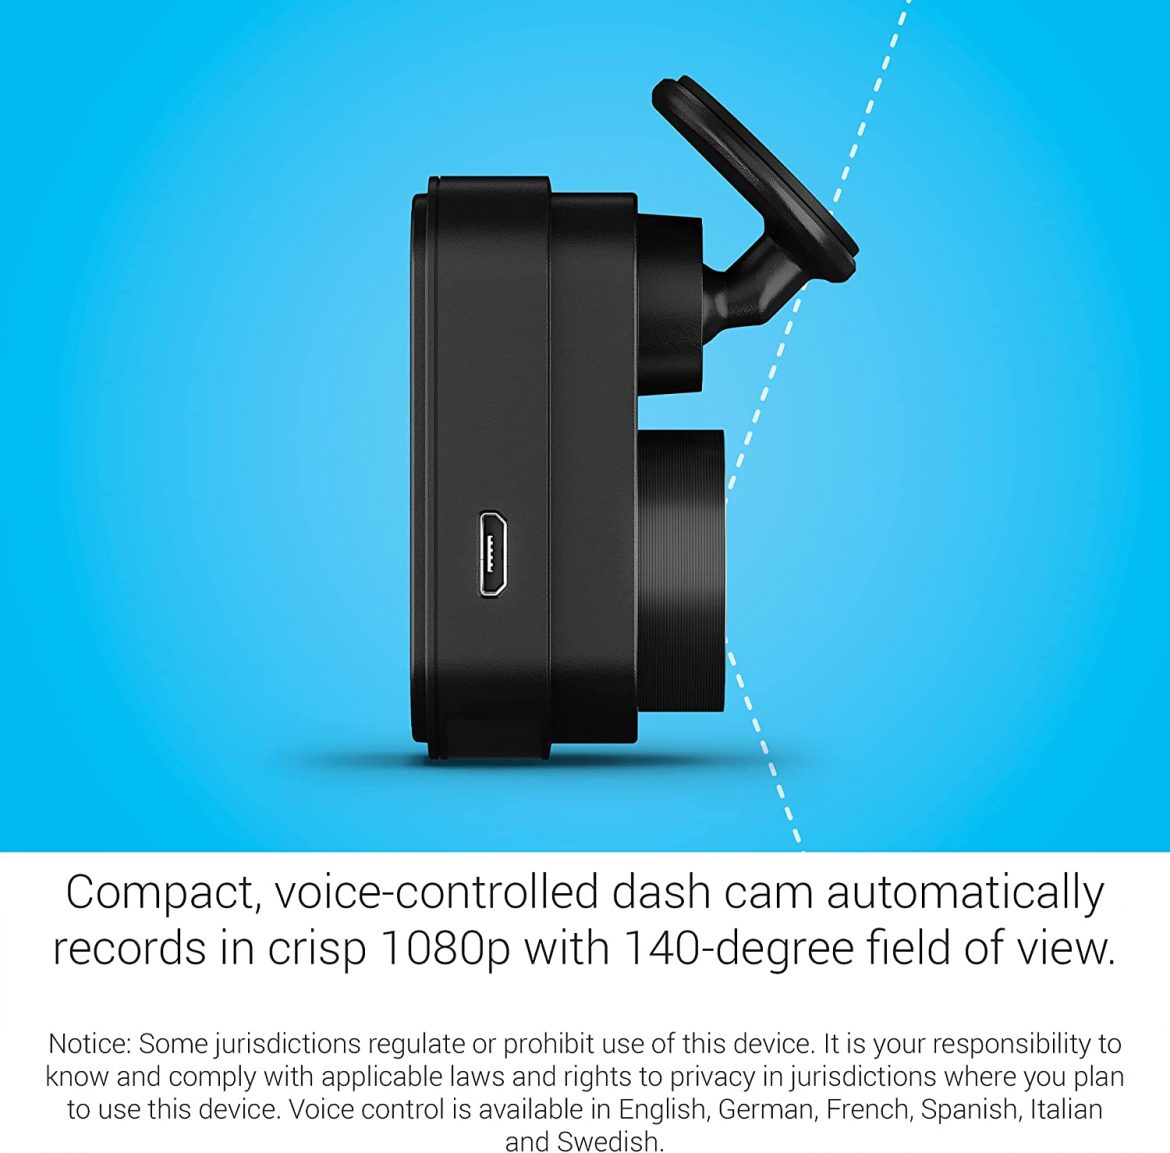 Garmin Dash Cam Mini 2, Tiny Size, 1080p and 140-degree FOV, Monitor Your Vehicle While Away w/ New Connected Features, Voice Control